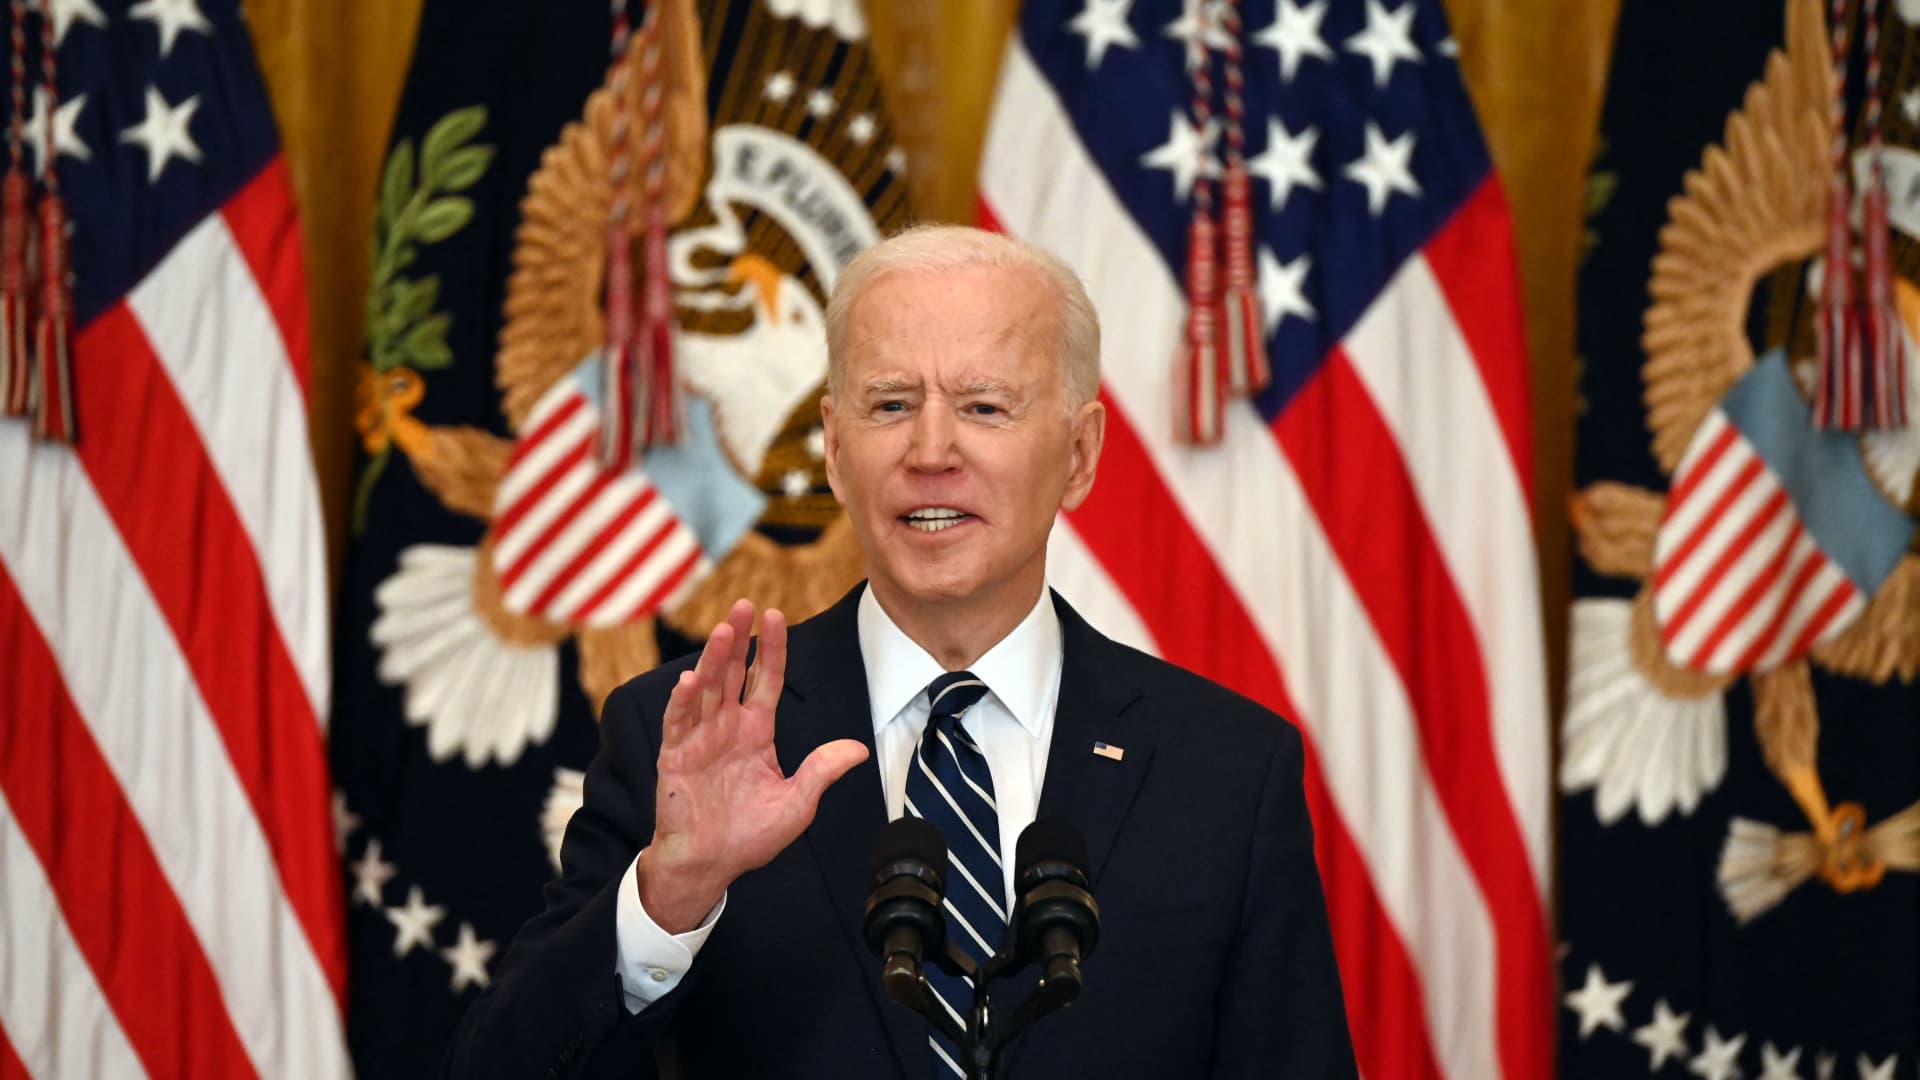 North Korea could launch a missile or nuclear test to 'overshadow' Biden's first Asia trip - CNBC : The White House has been bracing itself for a "genuine possibility" there will be either a missile test or a nuclear test during Biden's first visit to Asia as president.  | Tranquility 國際社群